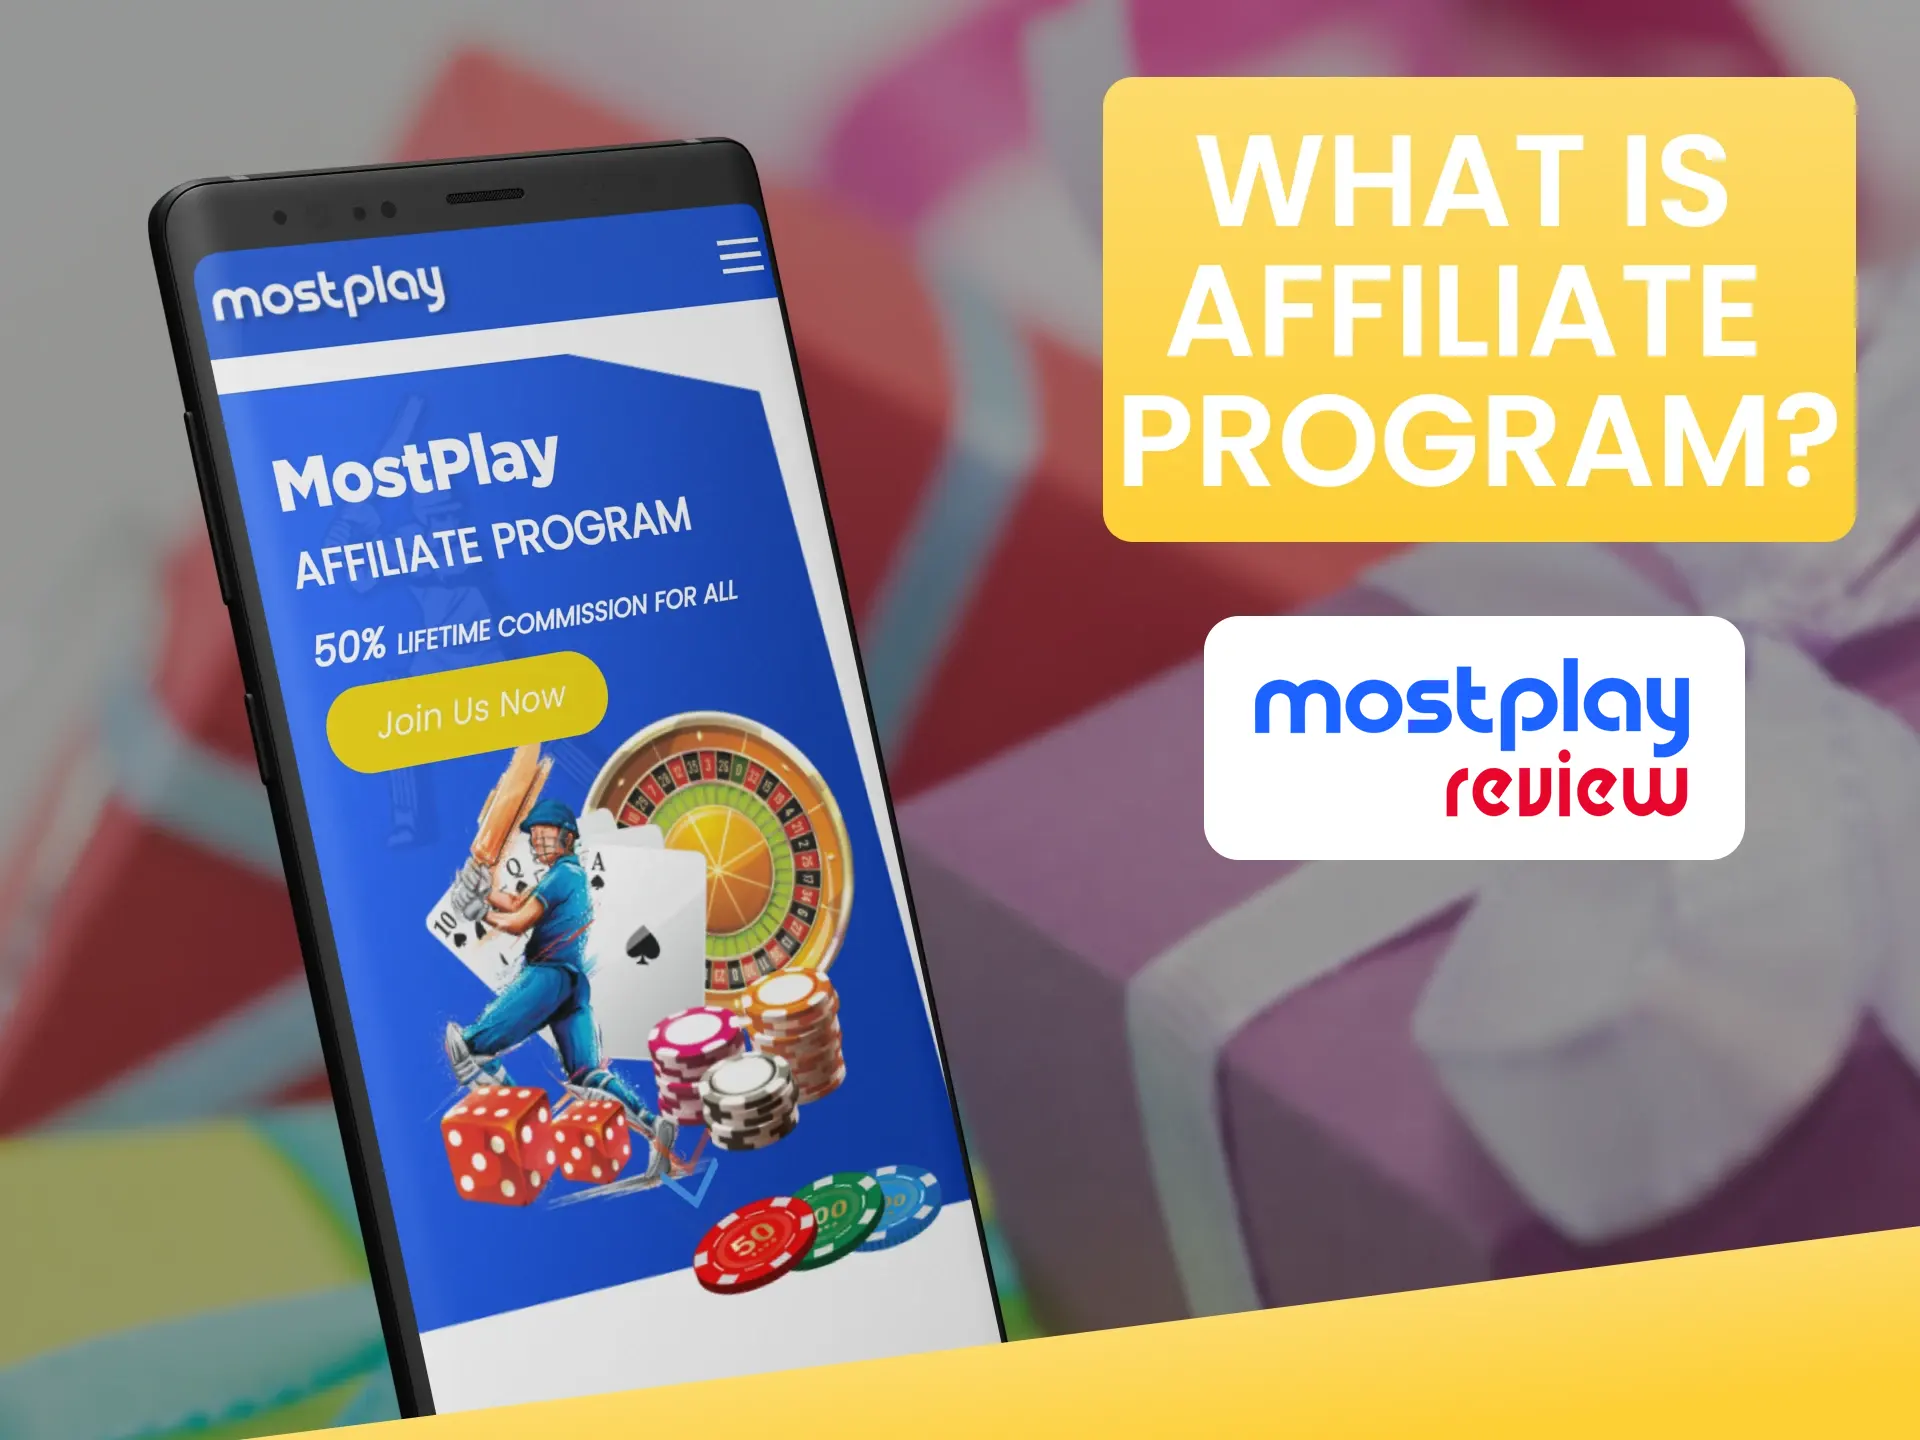 Learn all about the Mostplay affiliate program.